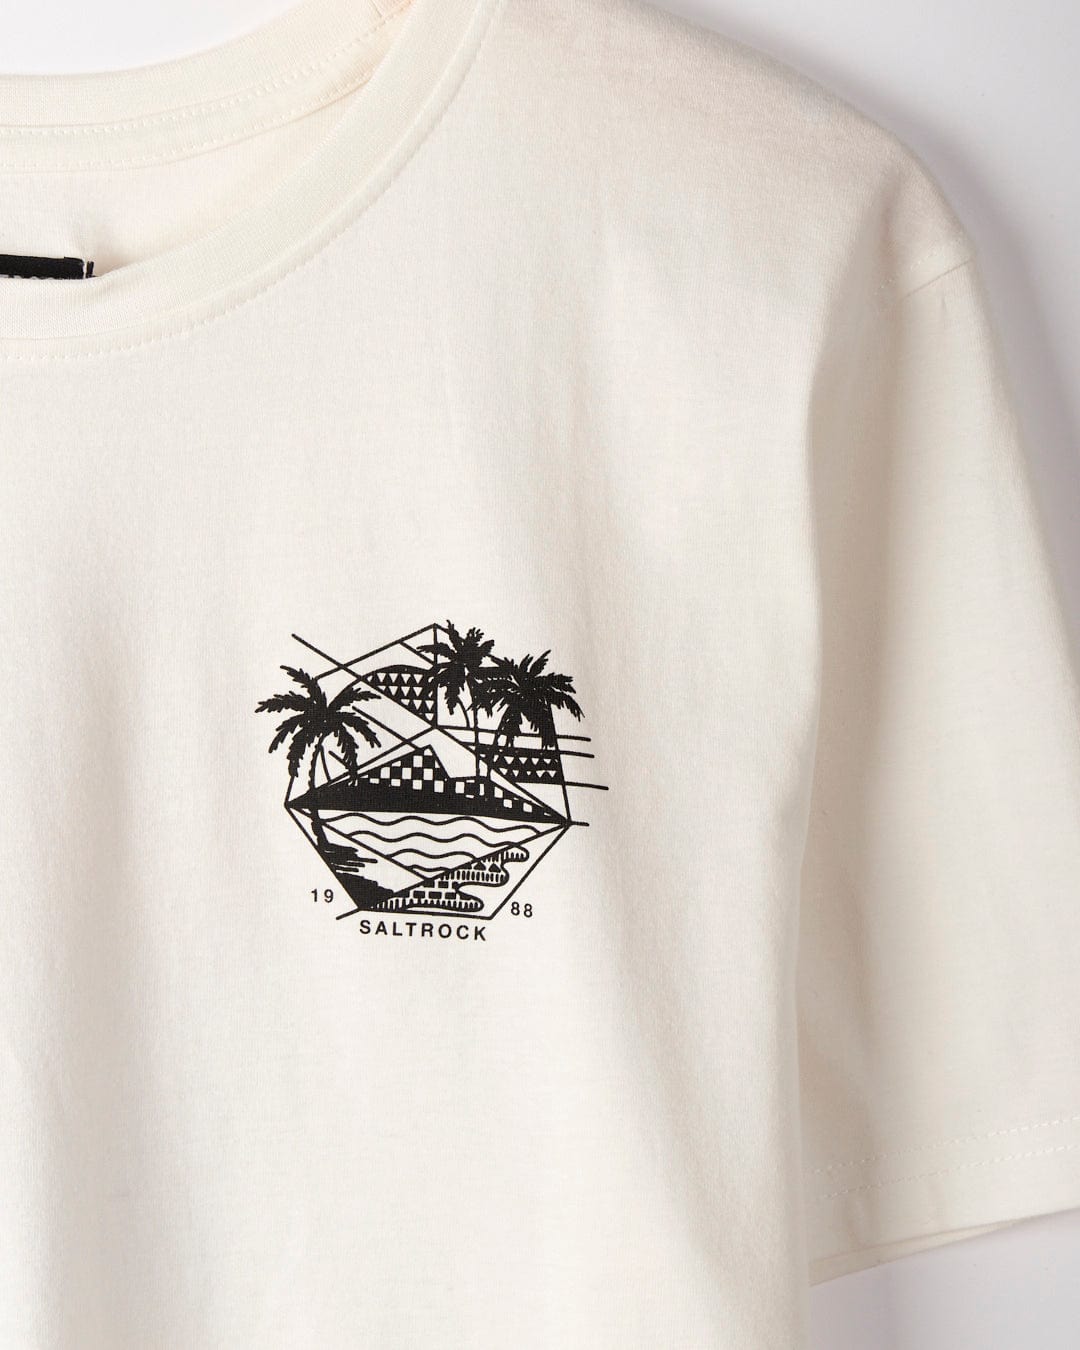 The Geo Palms - Mens T-Shirt - White, featuring Saltrock graphics with a black hexagonal design showcasing palm trees, ocean waves, a sun, and the text "Saltrock 1988," is made from 100% cotton for ultimate comfort.